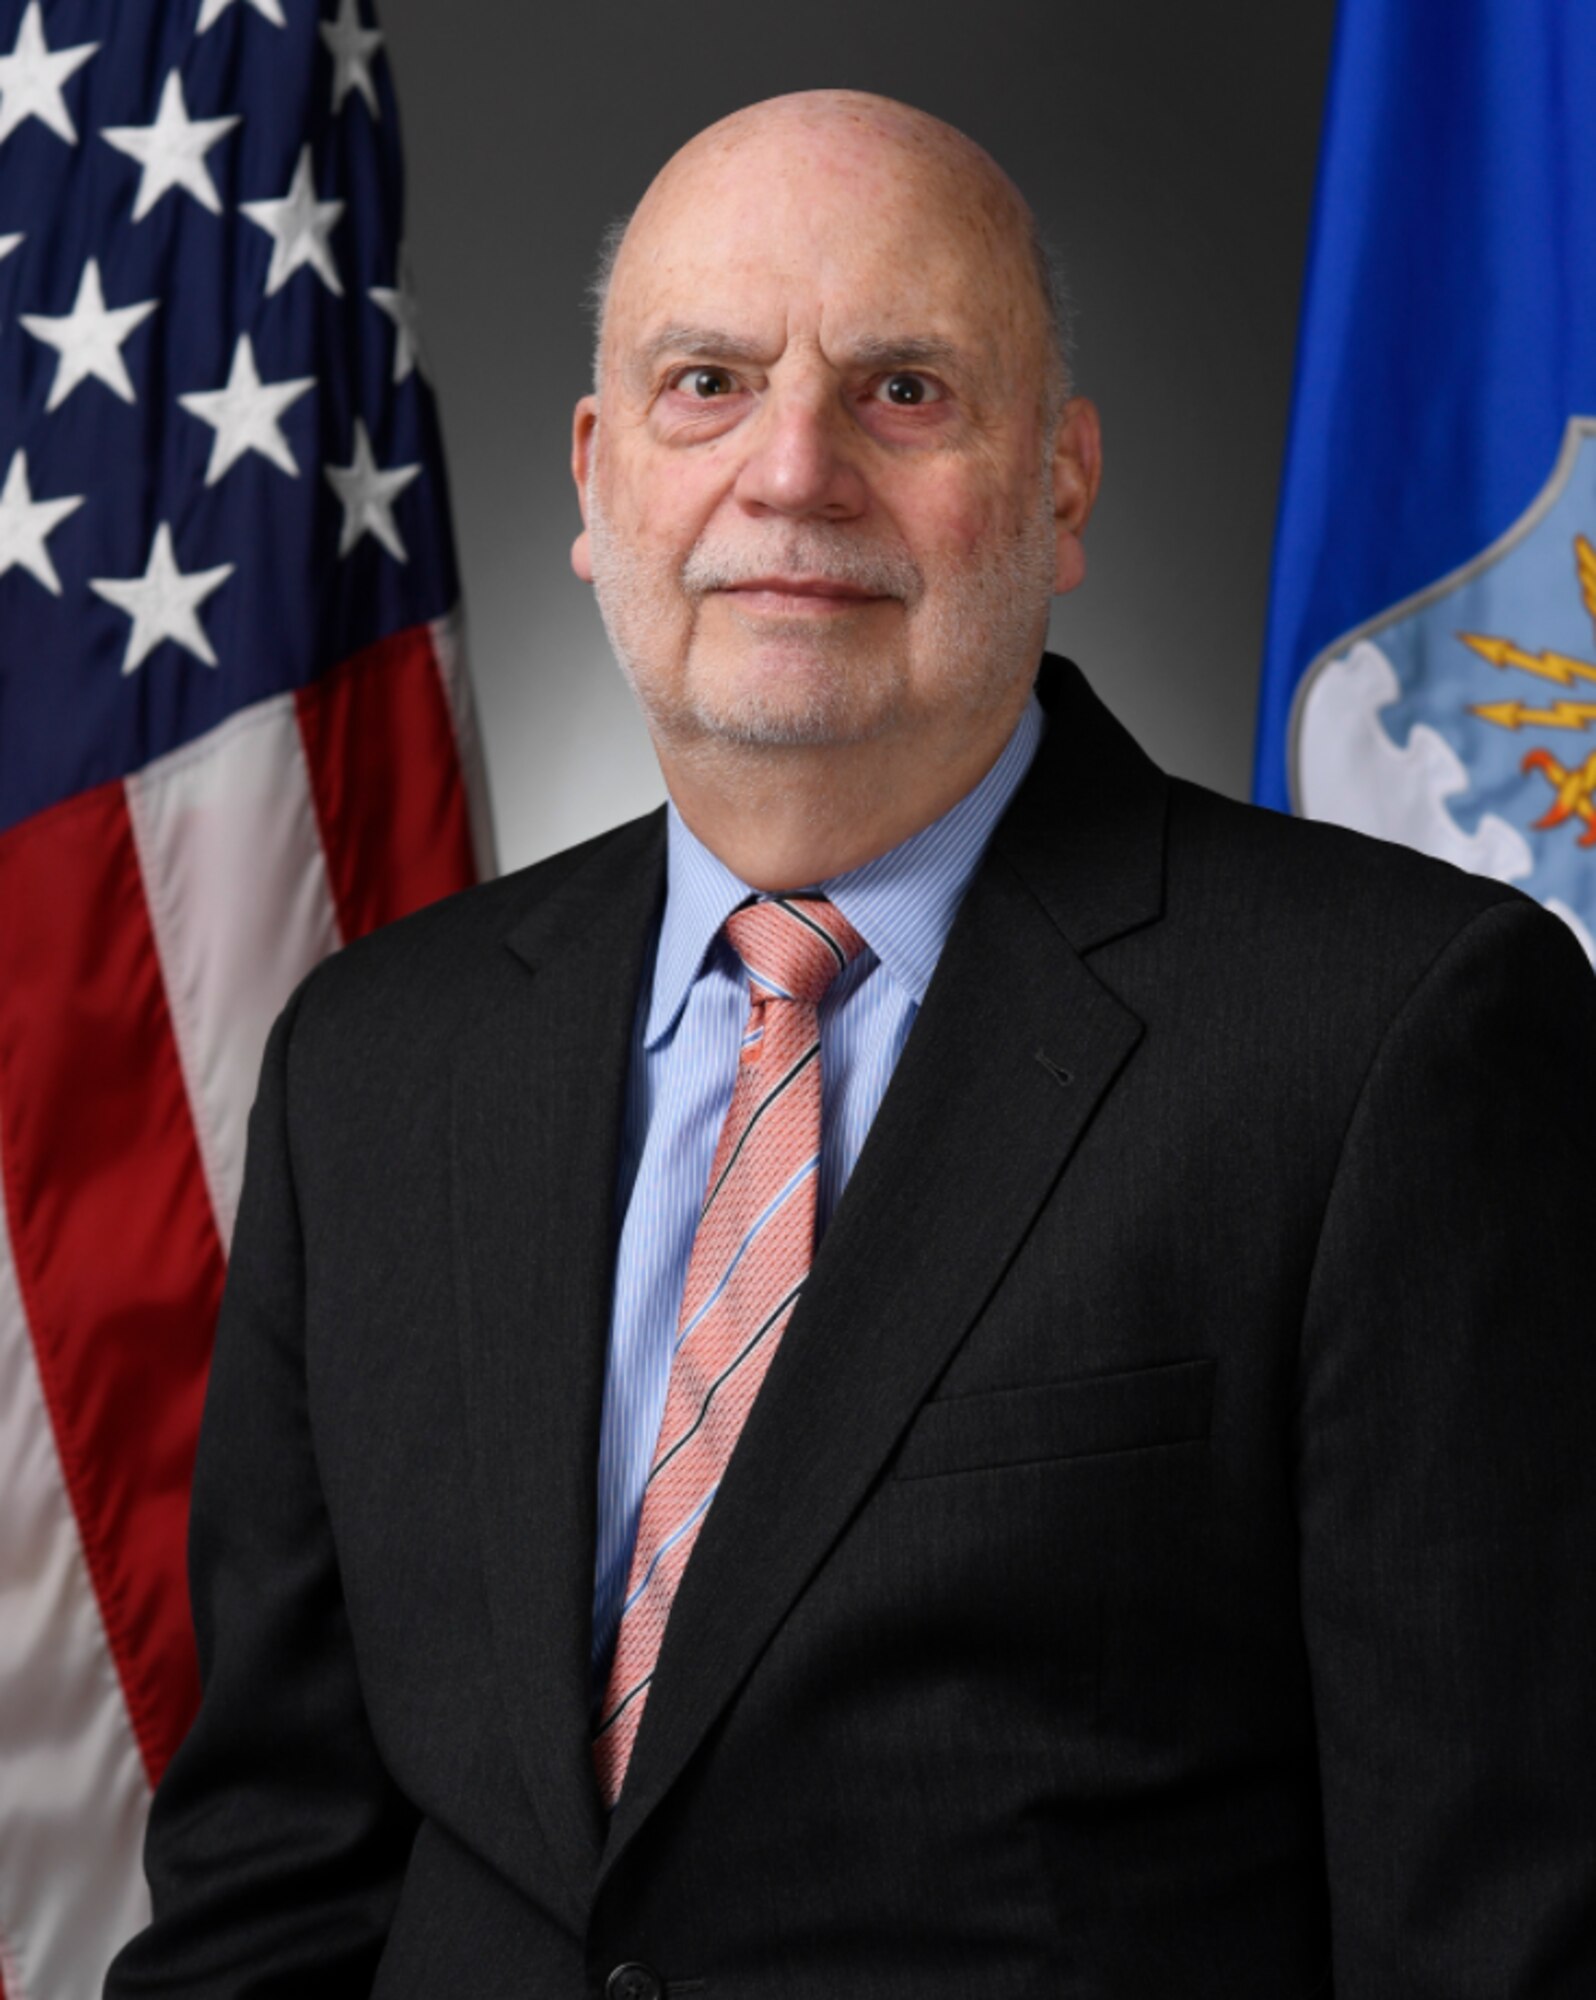 Acting Secretary of the Air Force John Roth poses in front of an Air Force flag on his left, and an American flag on his right. He looks tired.